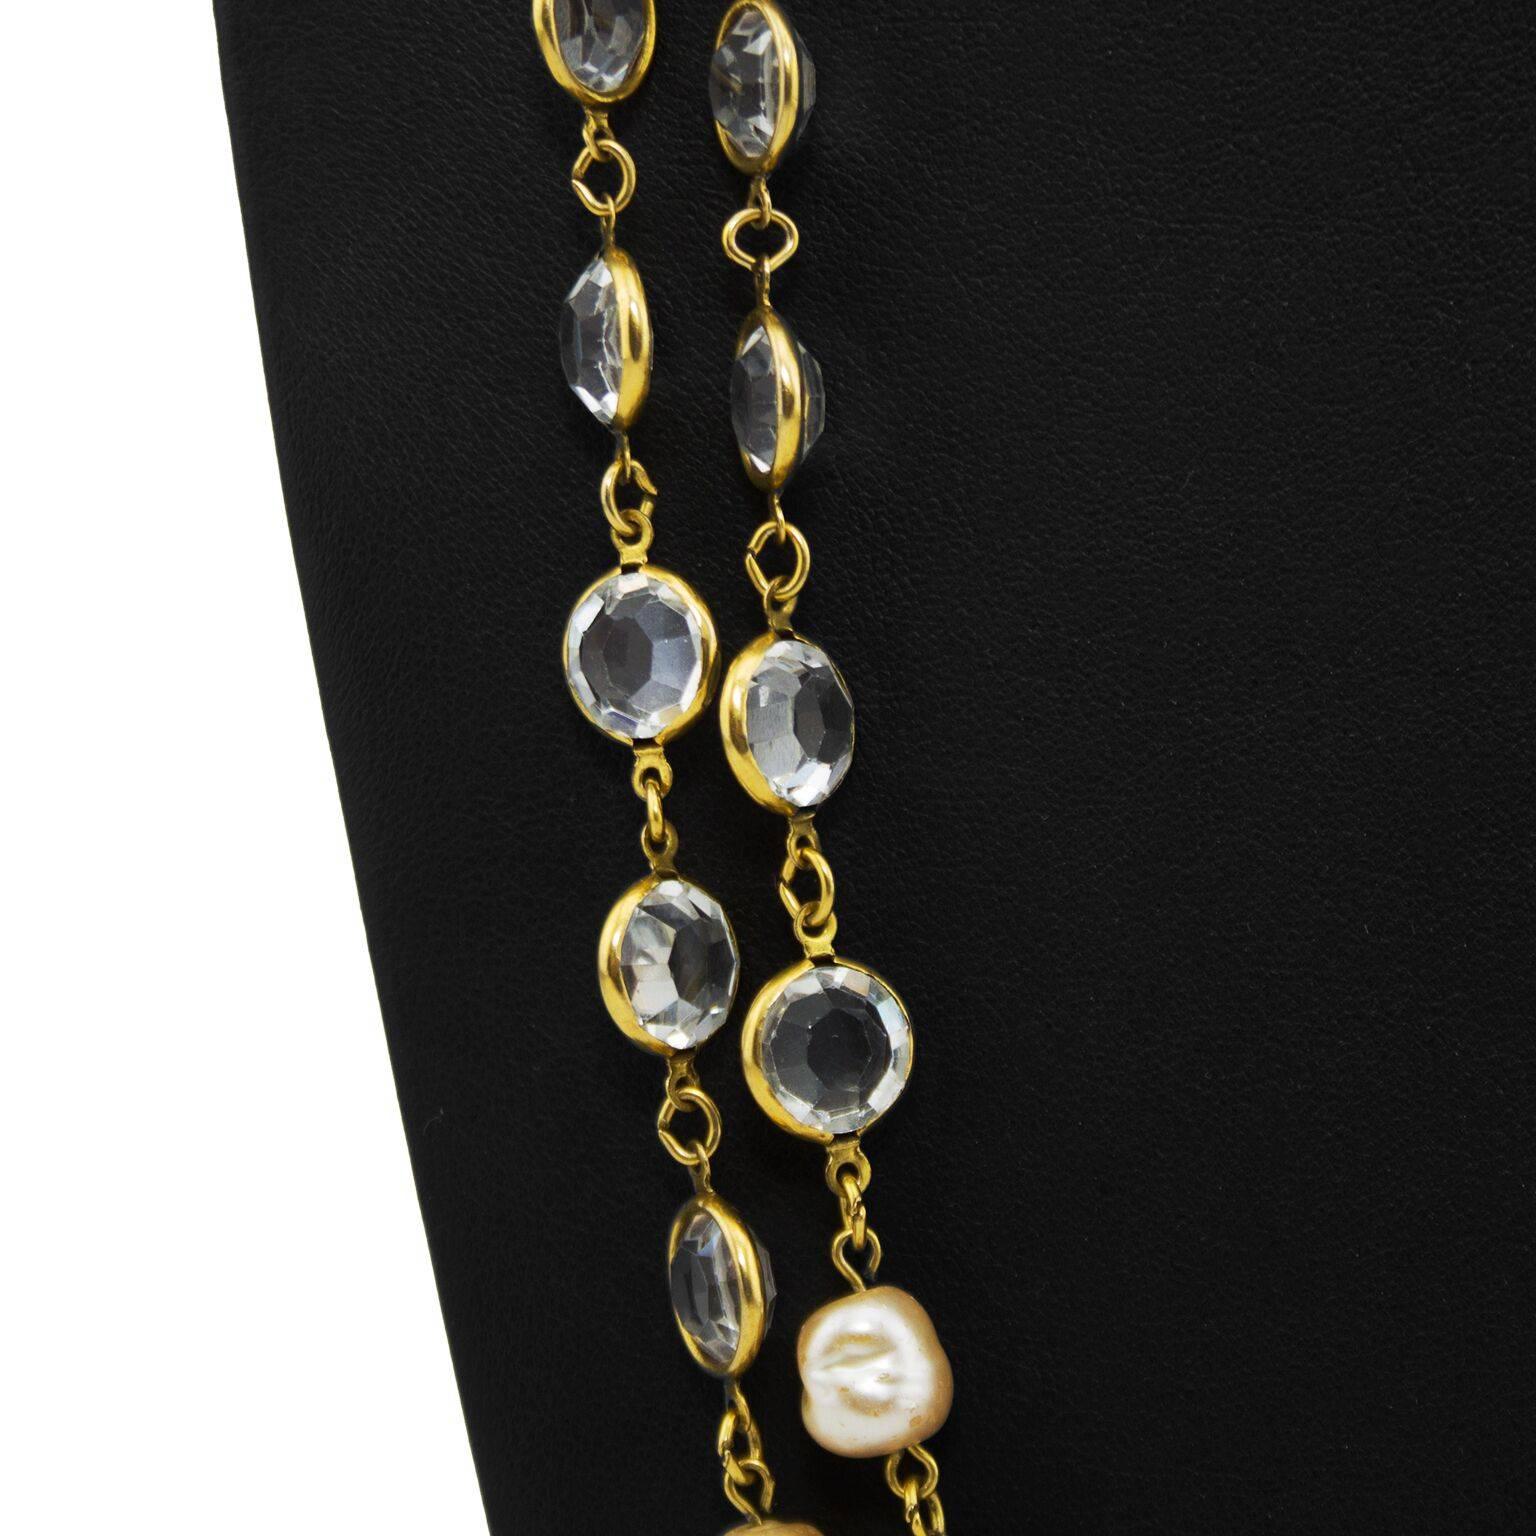 Beautiful and highly collectable long Chanel sautoir dating from 1981. No clasp, goes over the head and can be worn long or layered. Clear cut crystal and faux pearls in a gold tone metal setting. Small circular gold Chanel tag with markings.